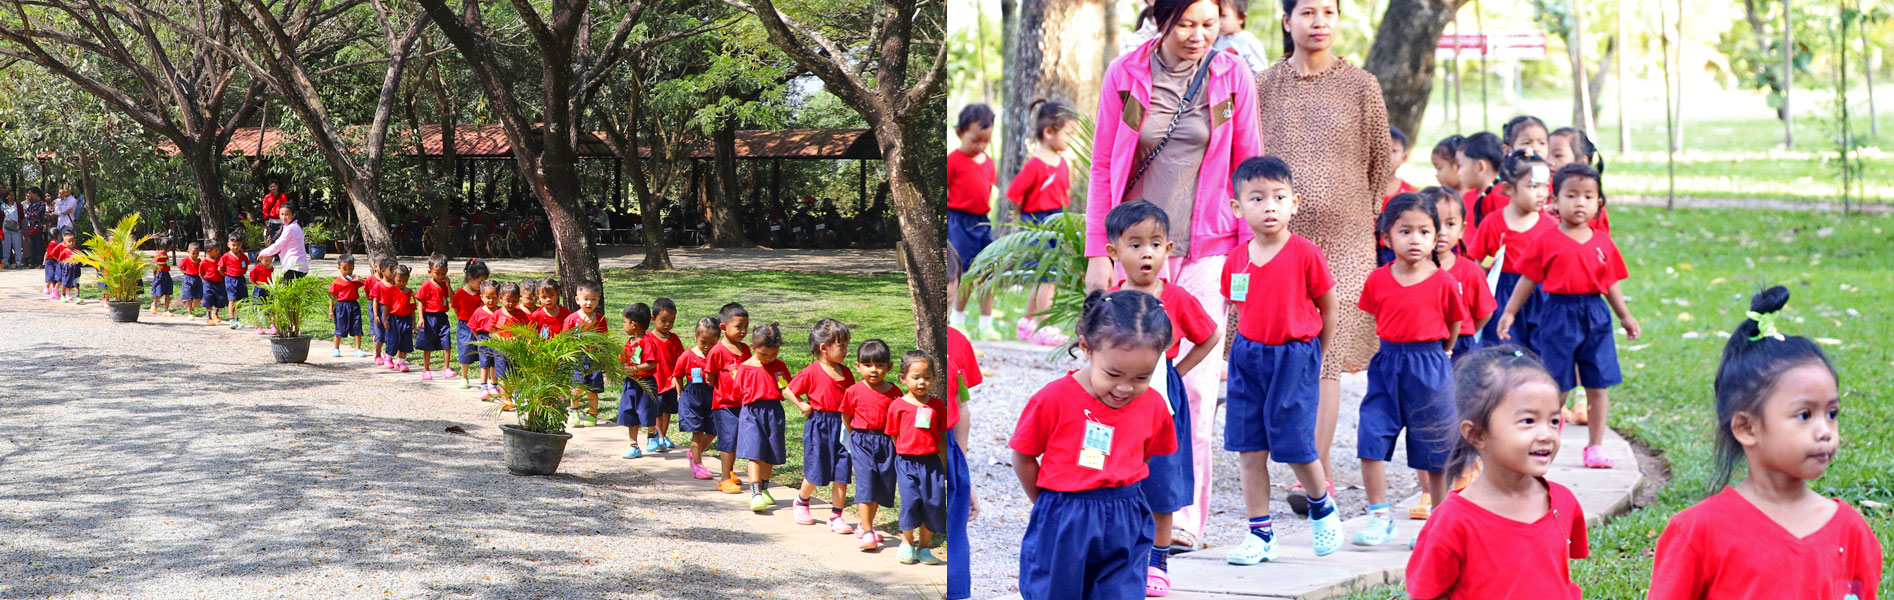 JPA students entering our new preschool wing. JPA Teachers welcomed over 160 two and three year old children to our beautiful, purpose-built facilities. Jay Pritzker Academy, Siem Reap, Cambodia. Jay-Pritzker-Academy-Siem-Reap-Cambodia.